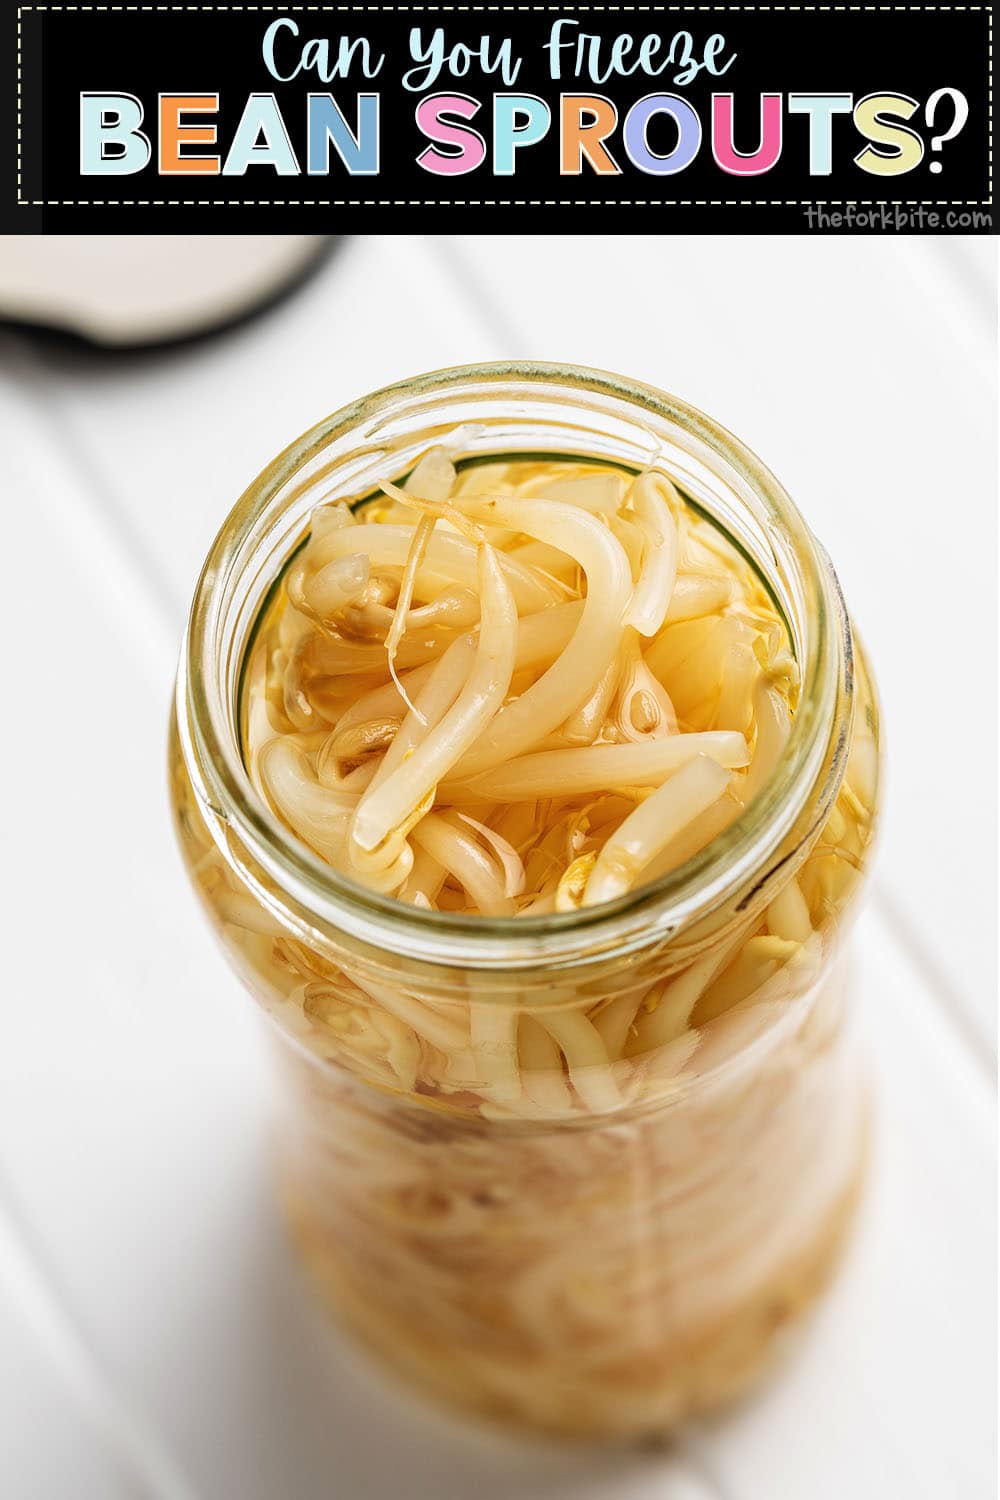 When you freeze bean sprouts, you will save yourself the disappointment of ending up with a soggy clump of bean shoots in your fridge if you use them in good time.